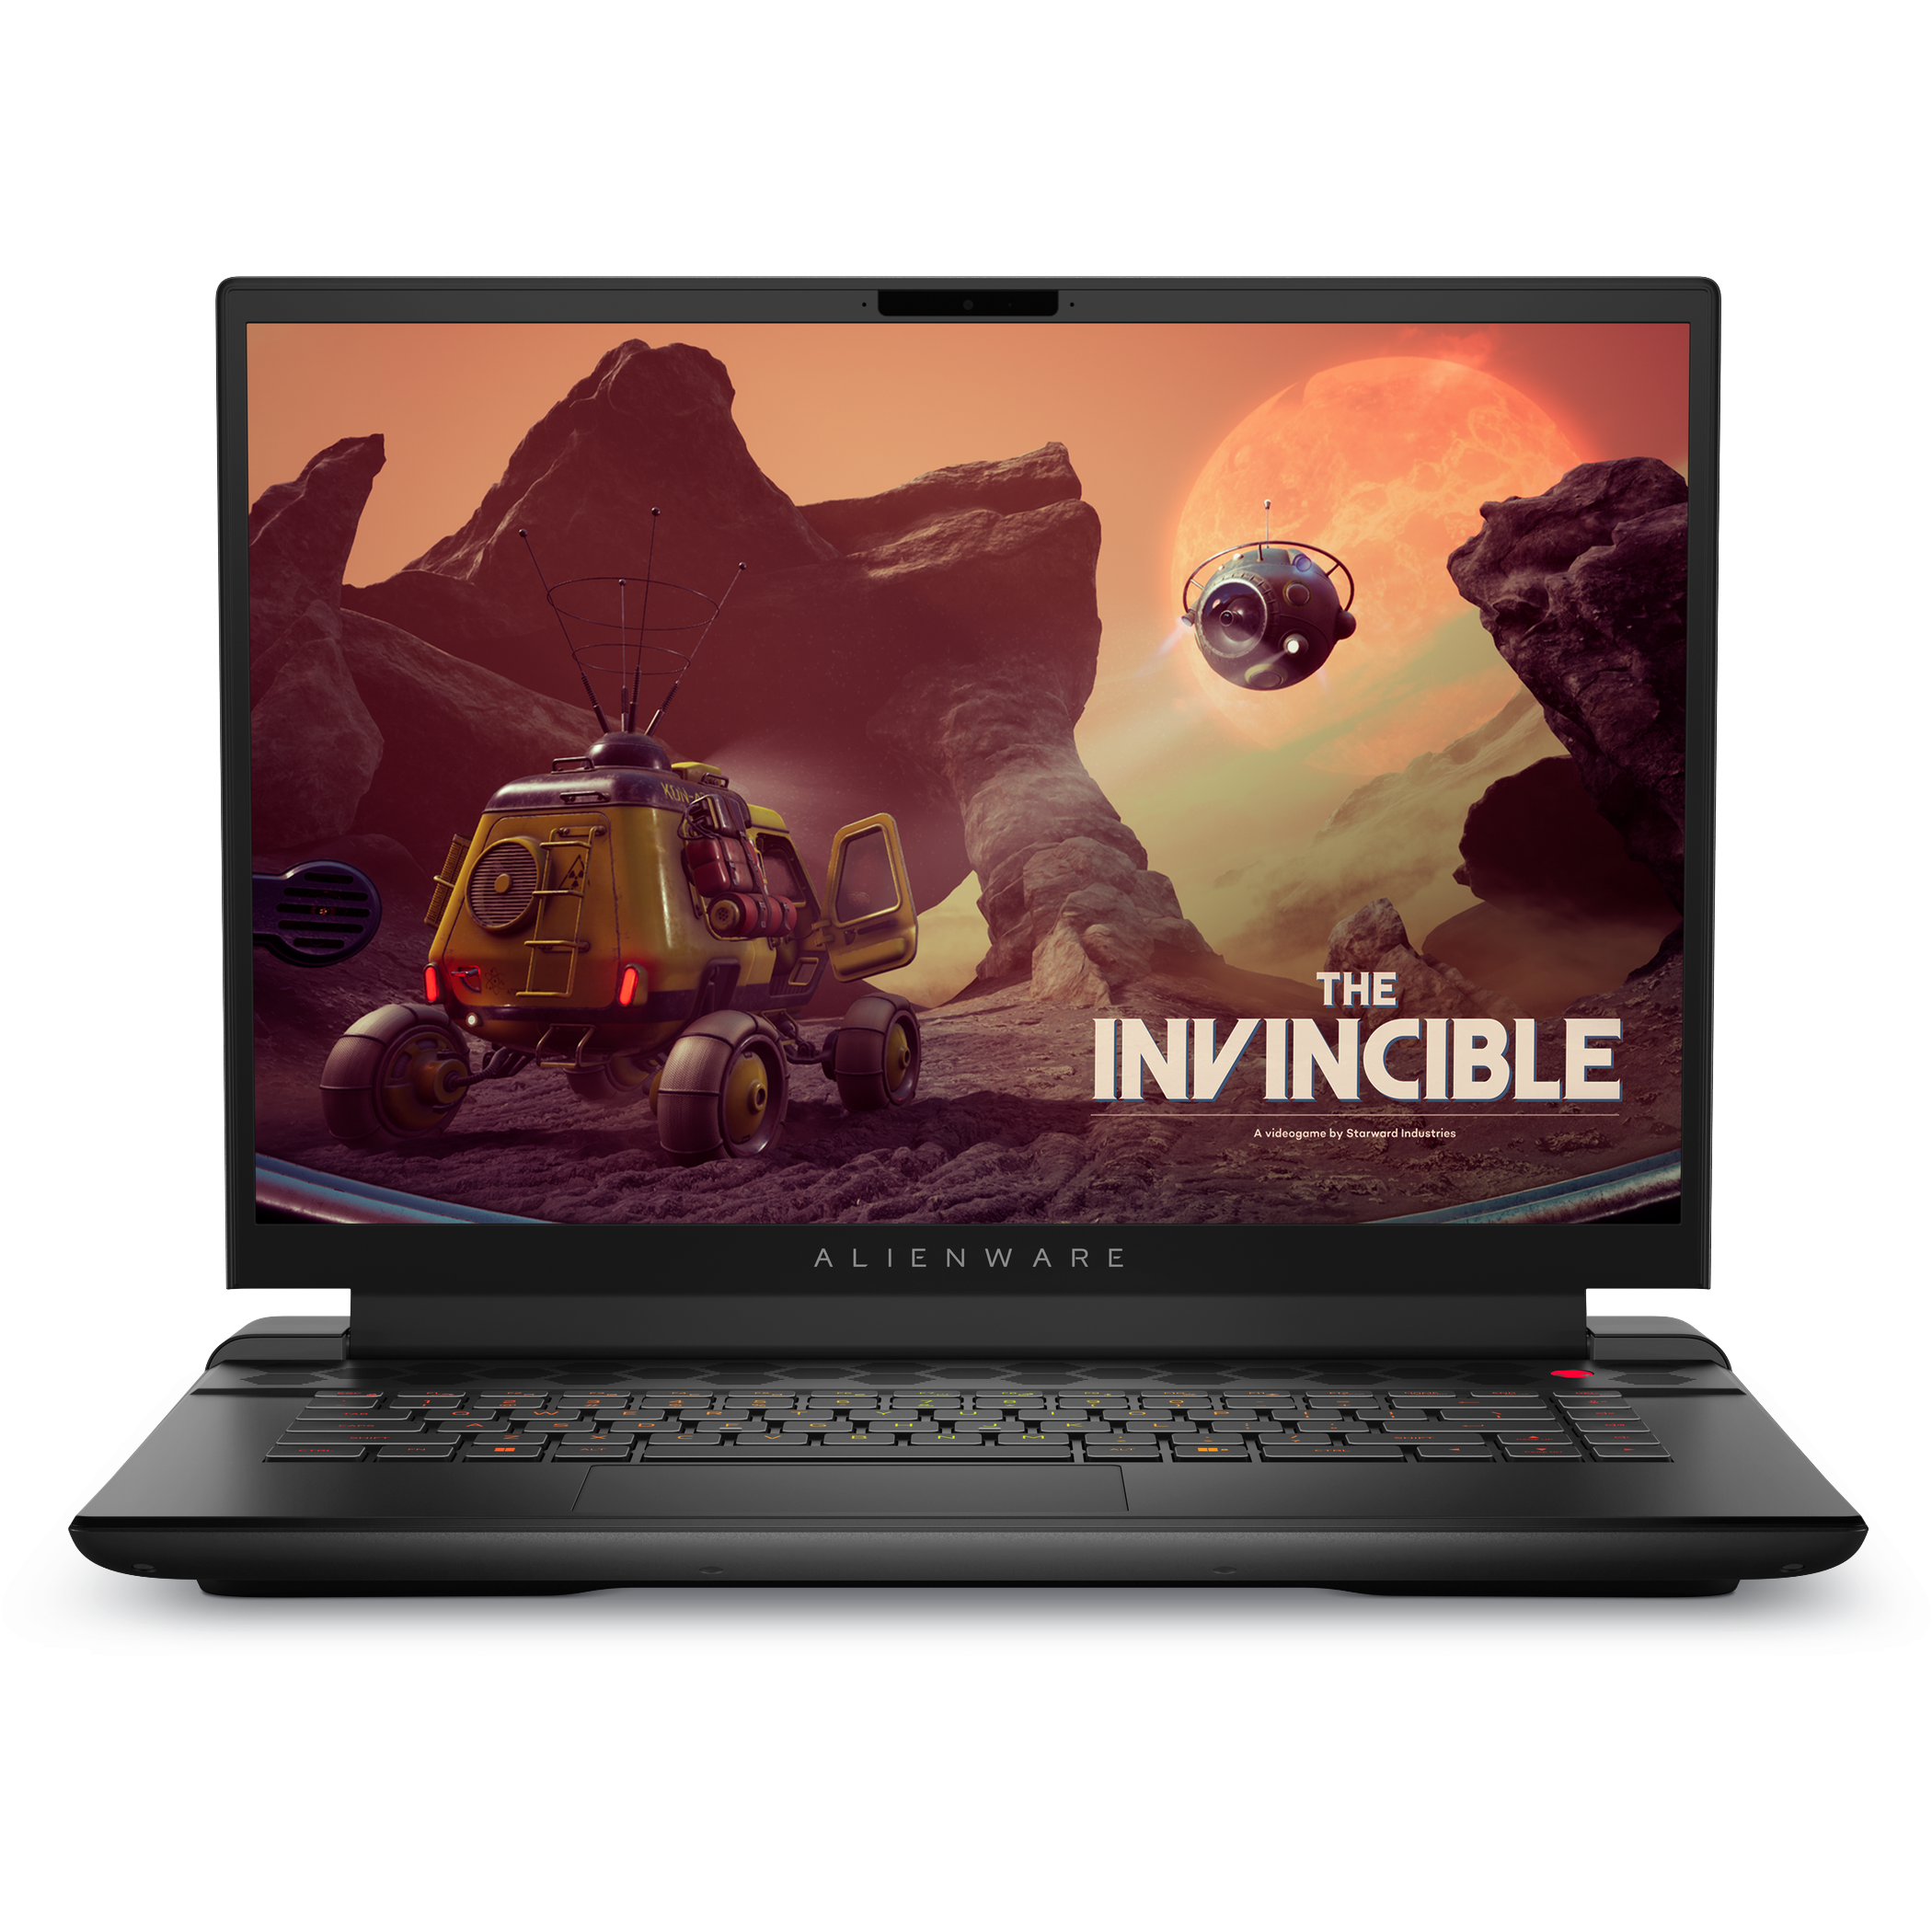 Front view of the Alienware m16 AMD laptop